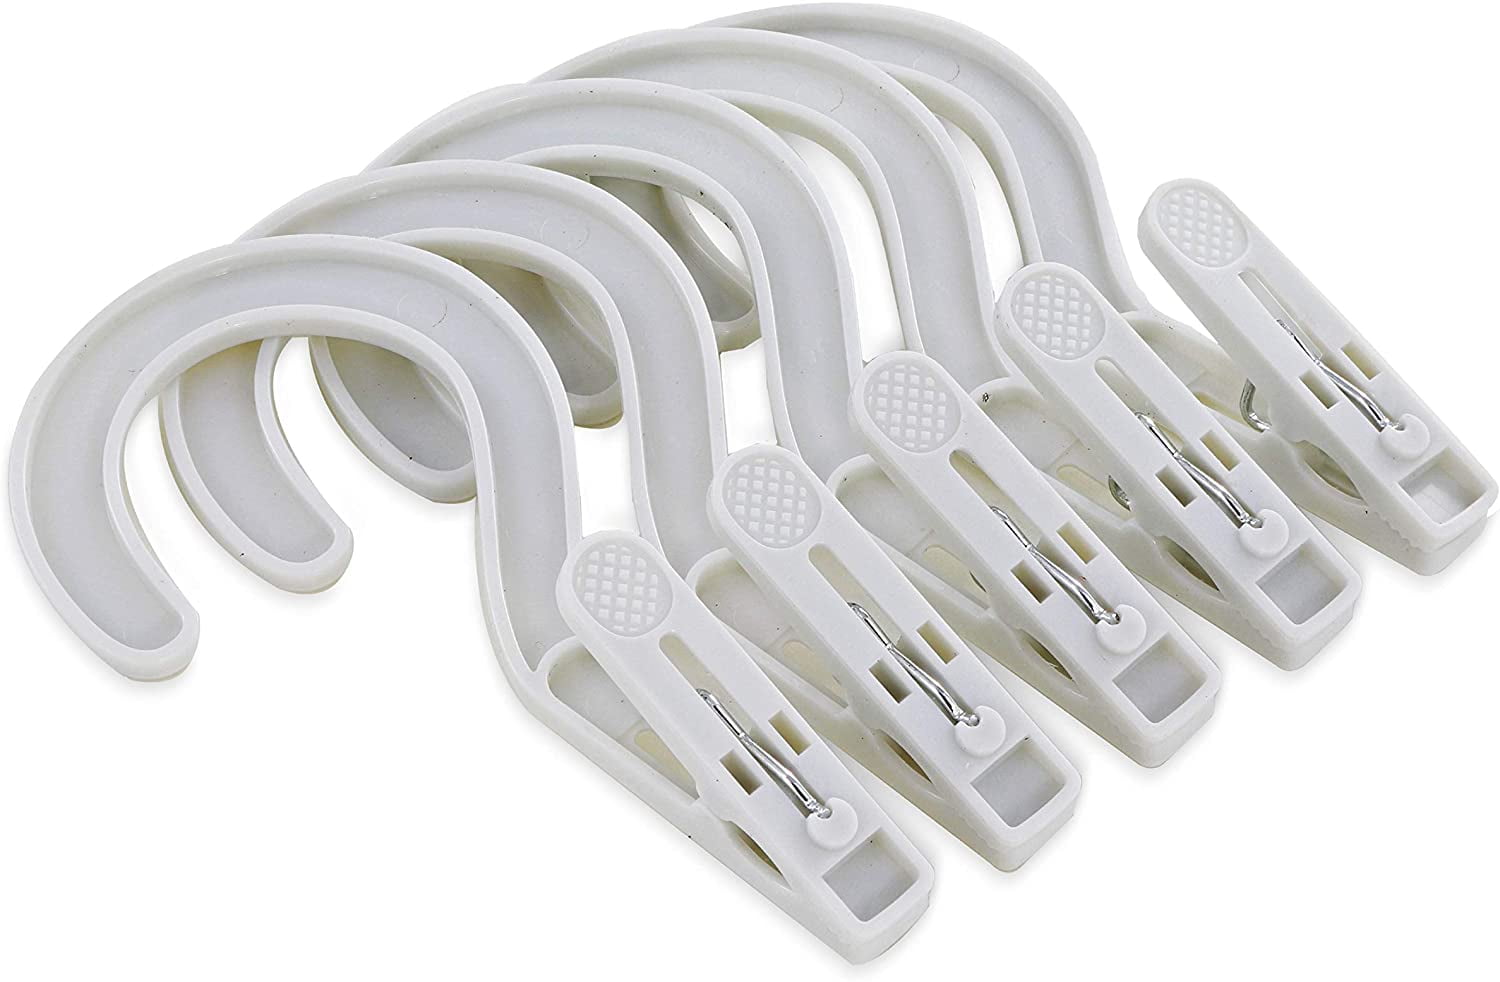 Rampro Laundry Hanger Hooks with Clips - Strong Plastic Solid